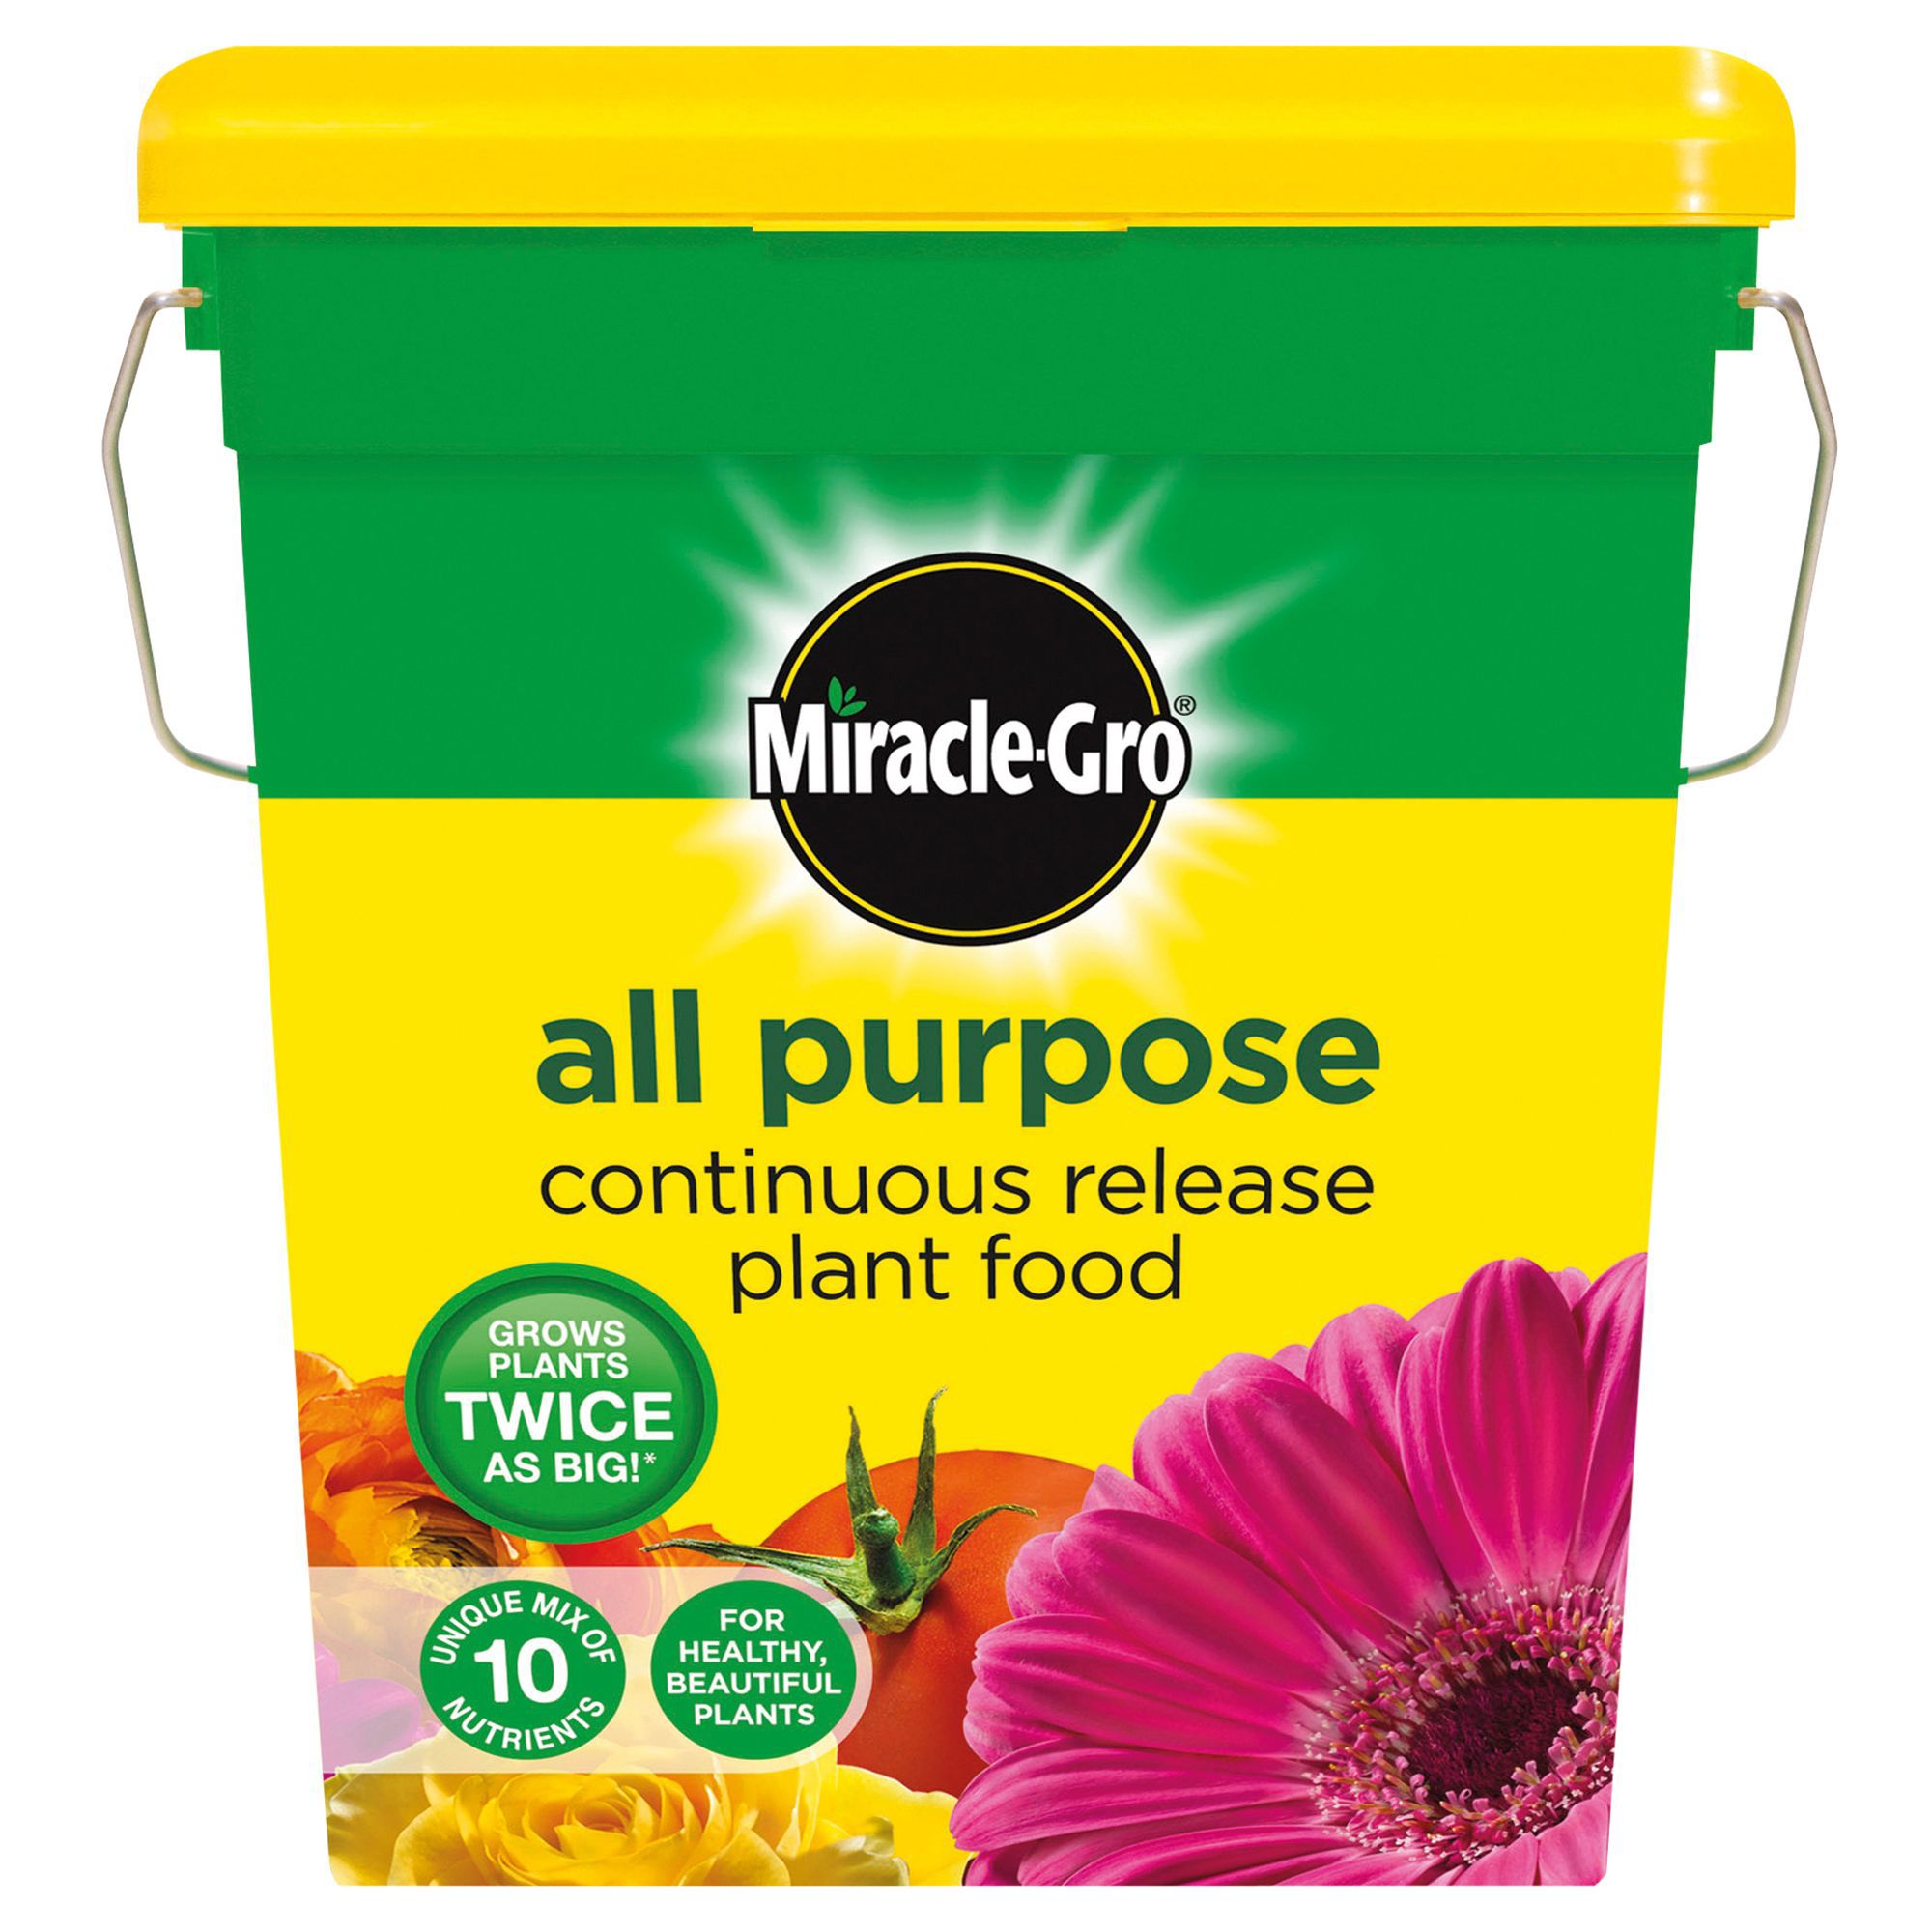 miracle-gro-all-purpose-continuous-release-plant-food-2kg-departments